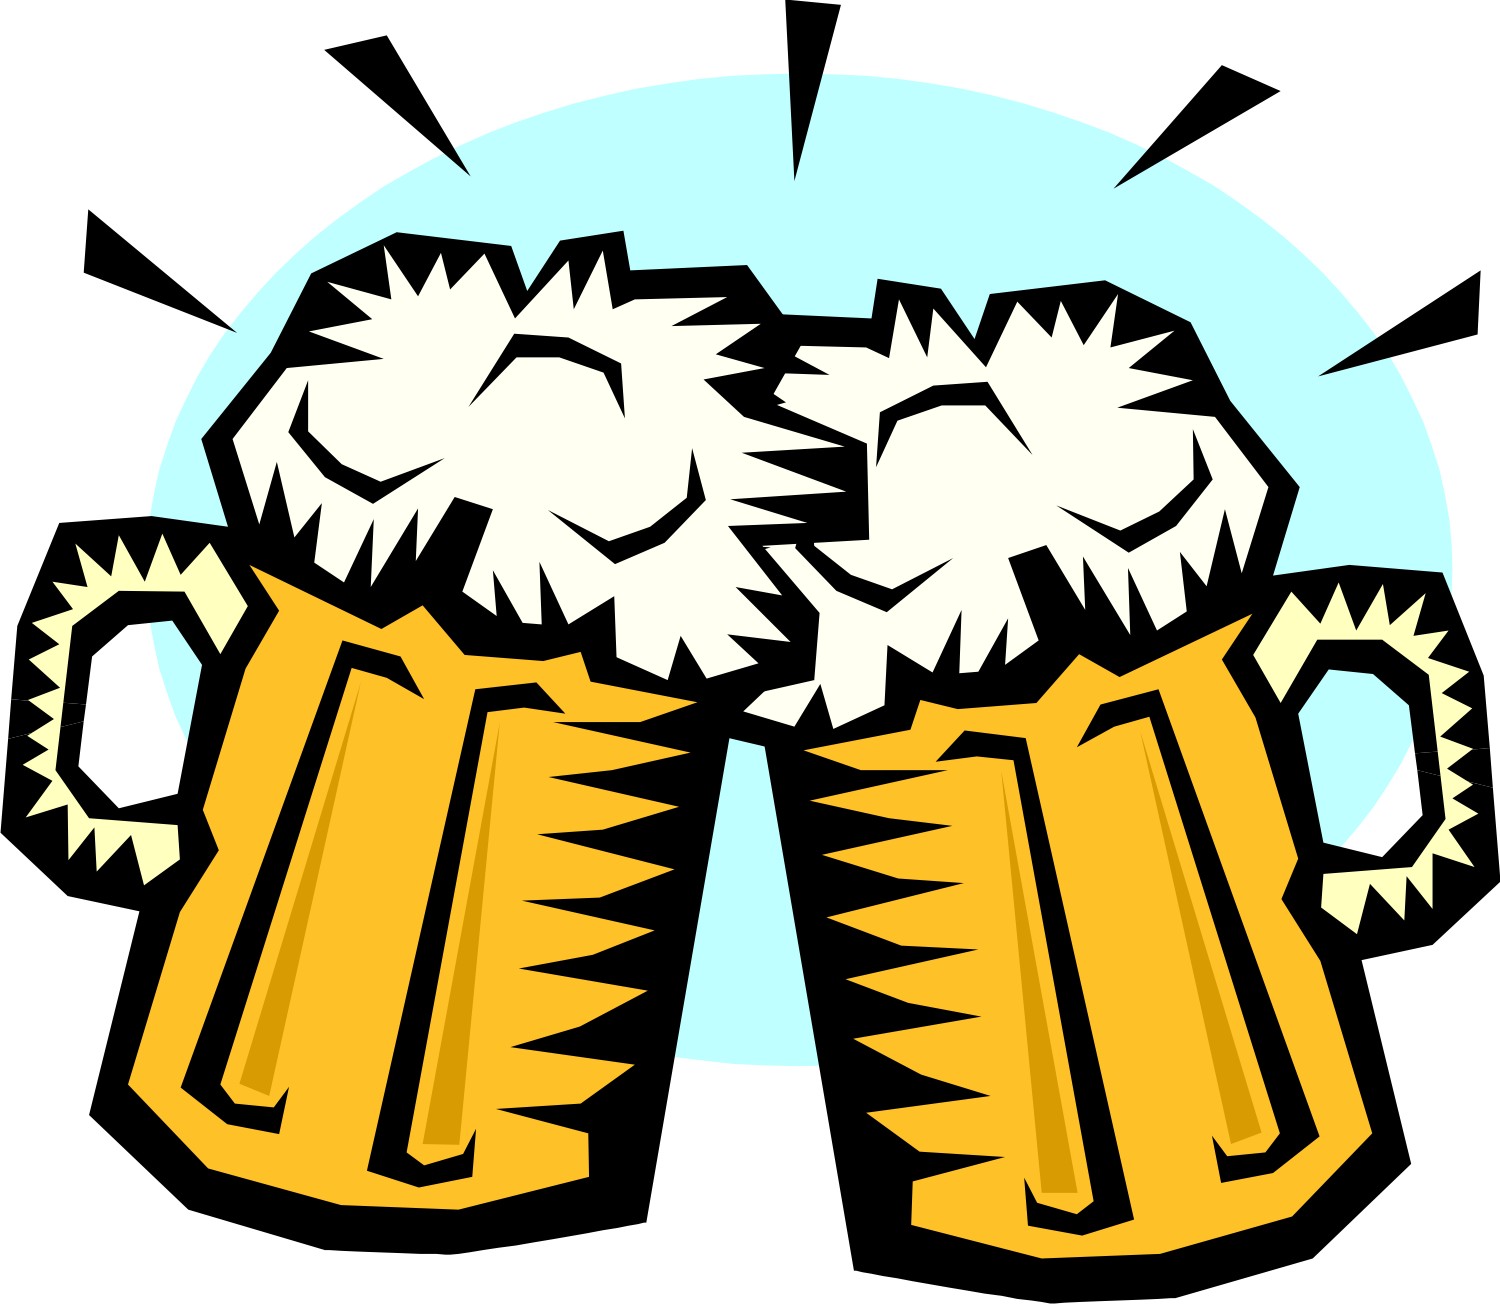 Beer Clip Art Free Download - Free Clipart Images